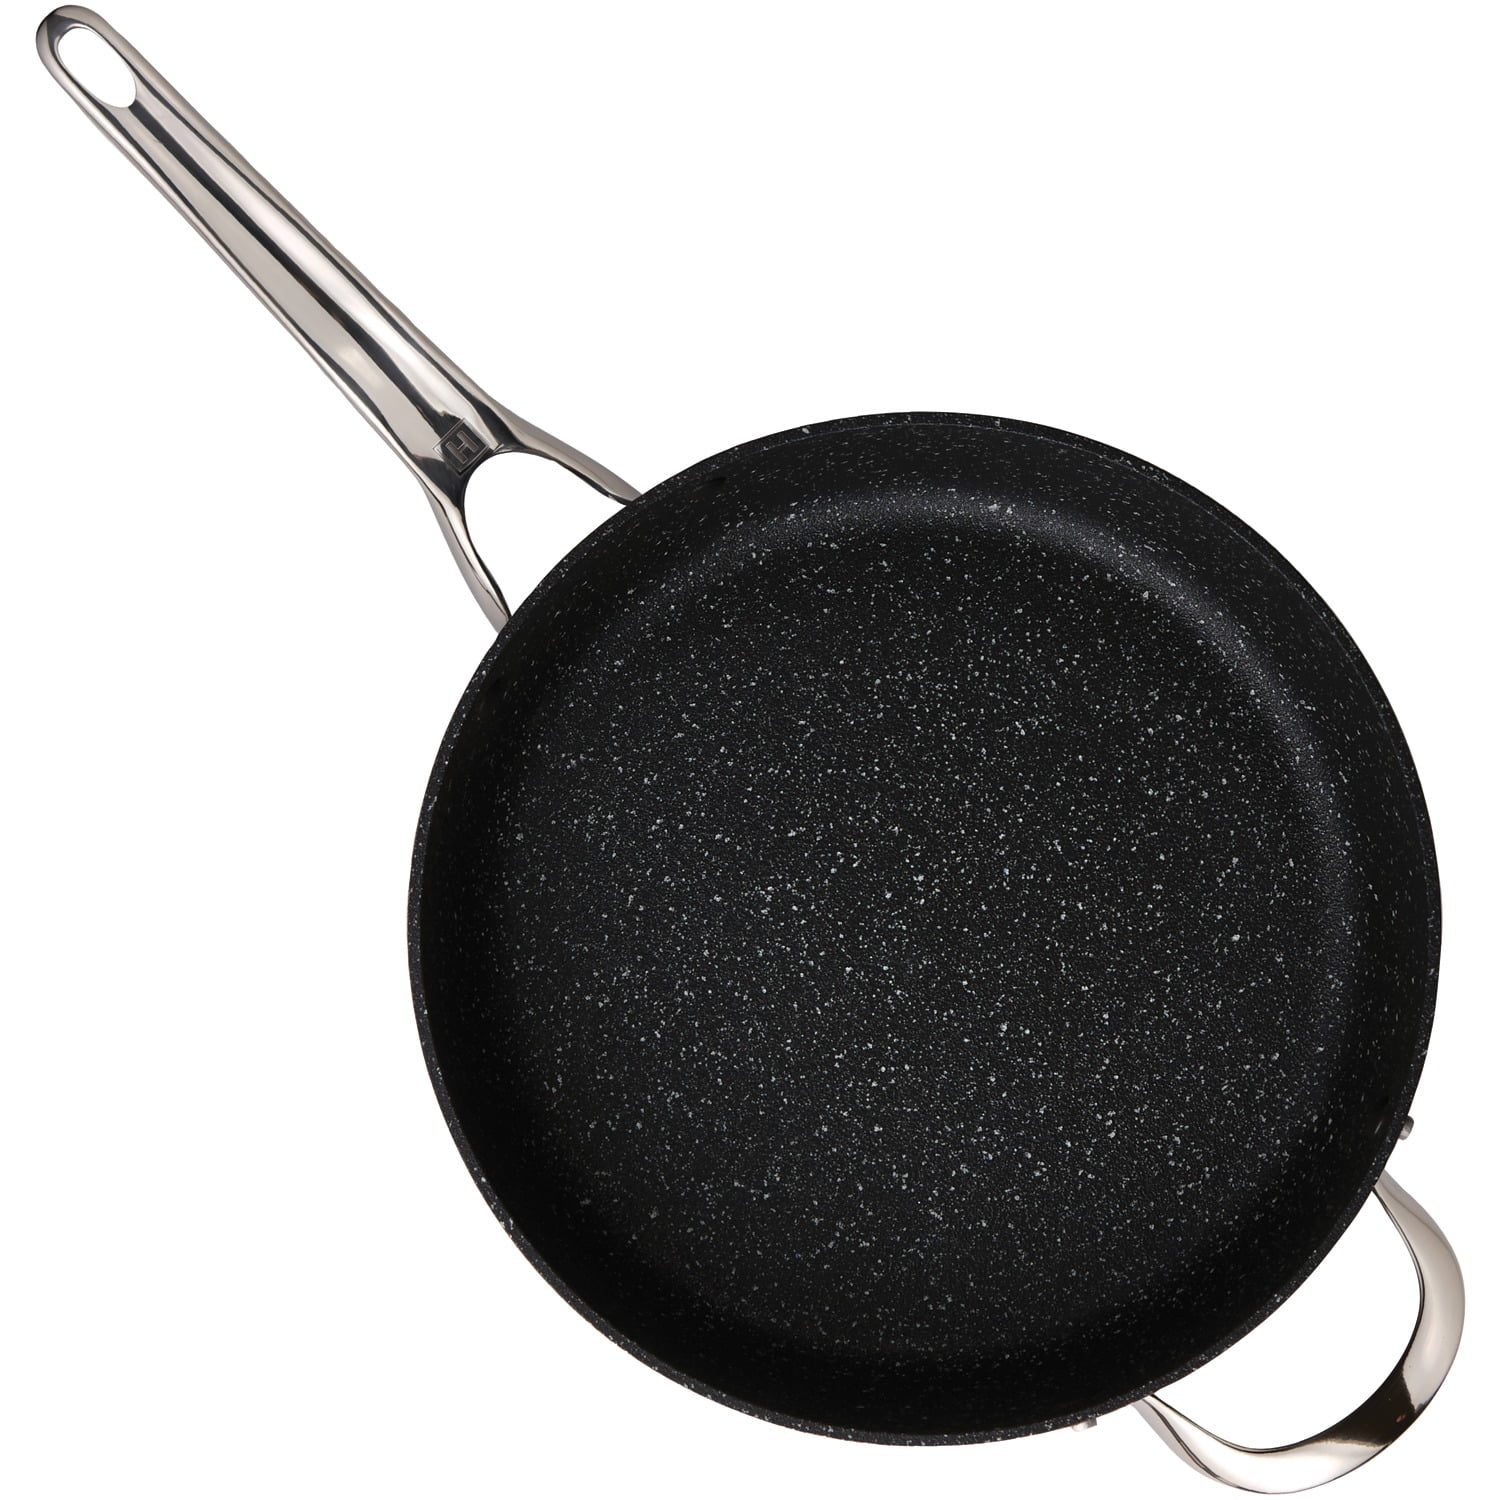 THE ROCK by Starfrit Personal Fry Pan with Stainless Steel Handle, 6.5 